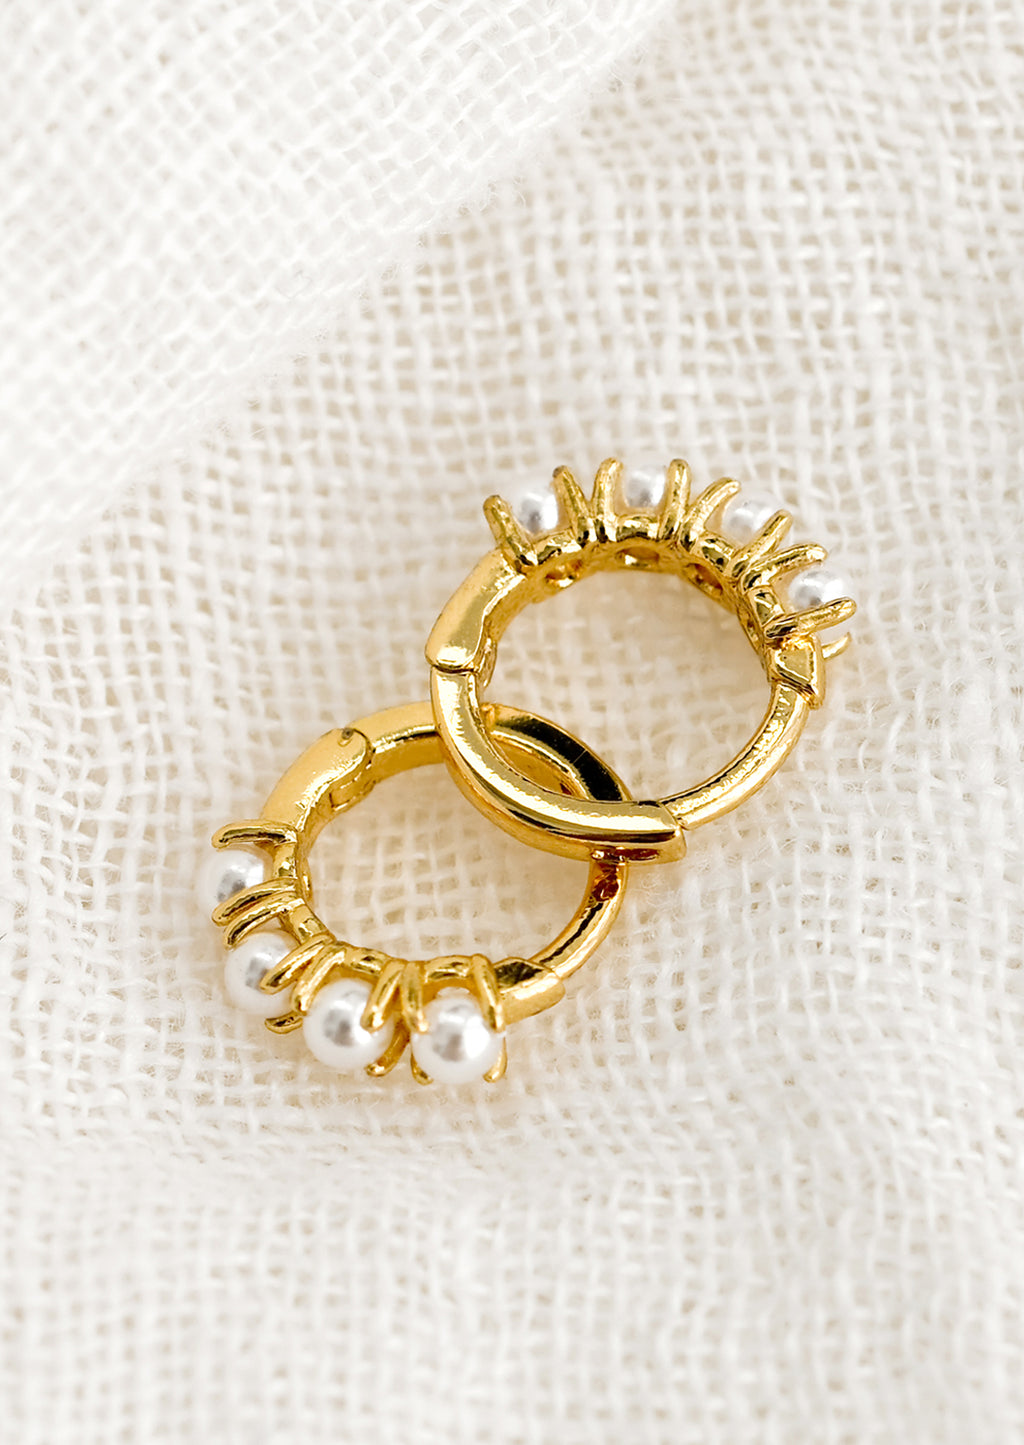 2: A pair of small gold huggie hoop earrings with round pearl detailing.